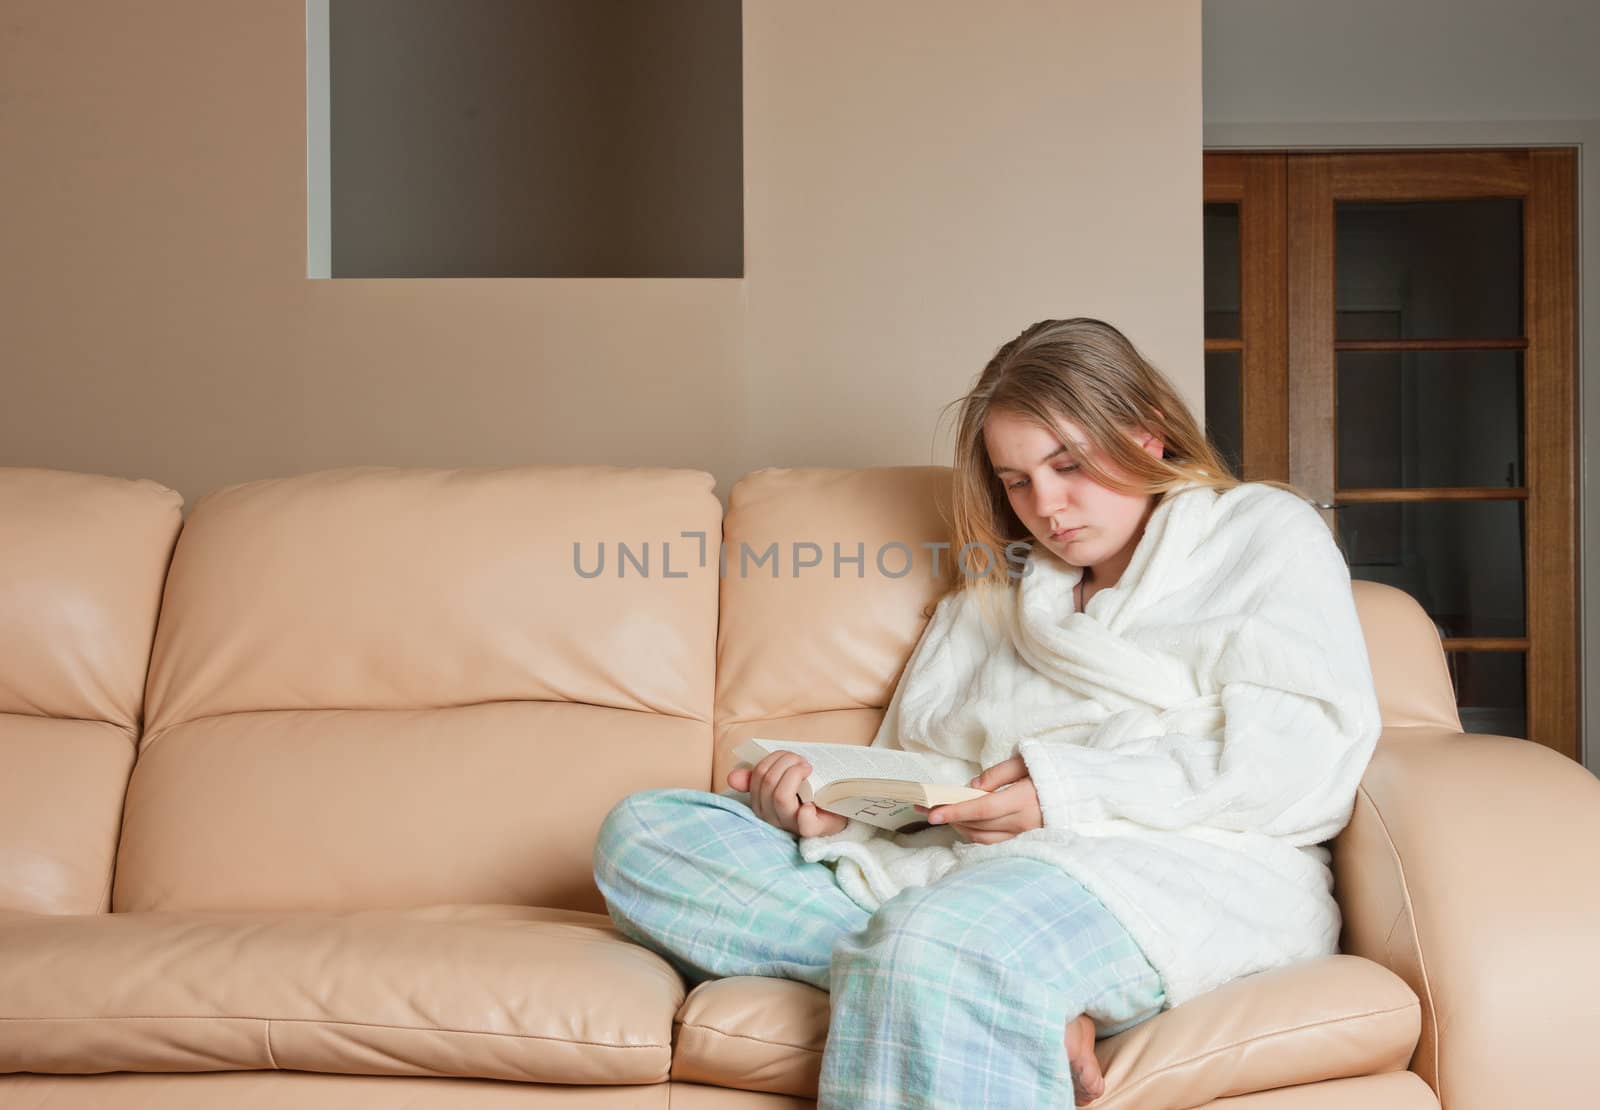 woman reading a book on sofa by clearviewstock